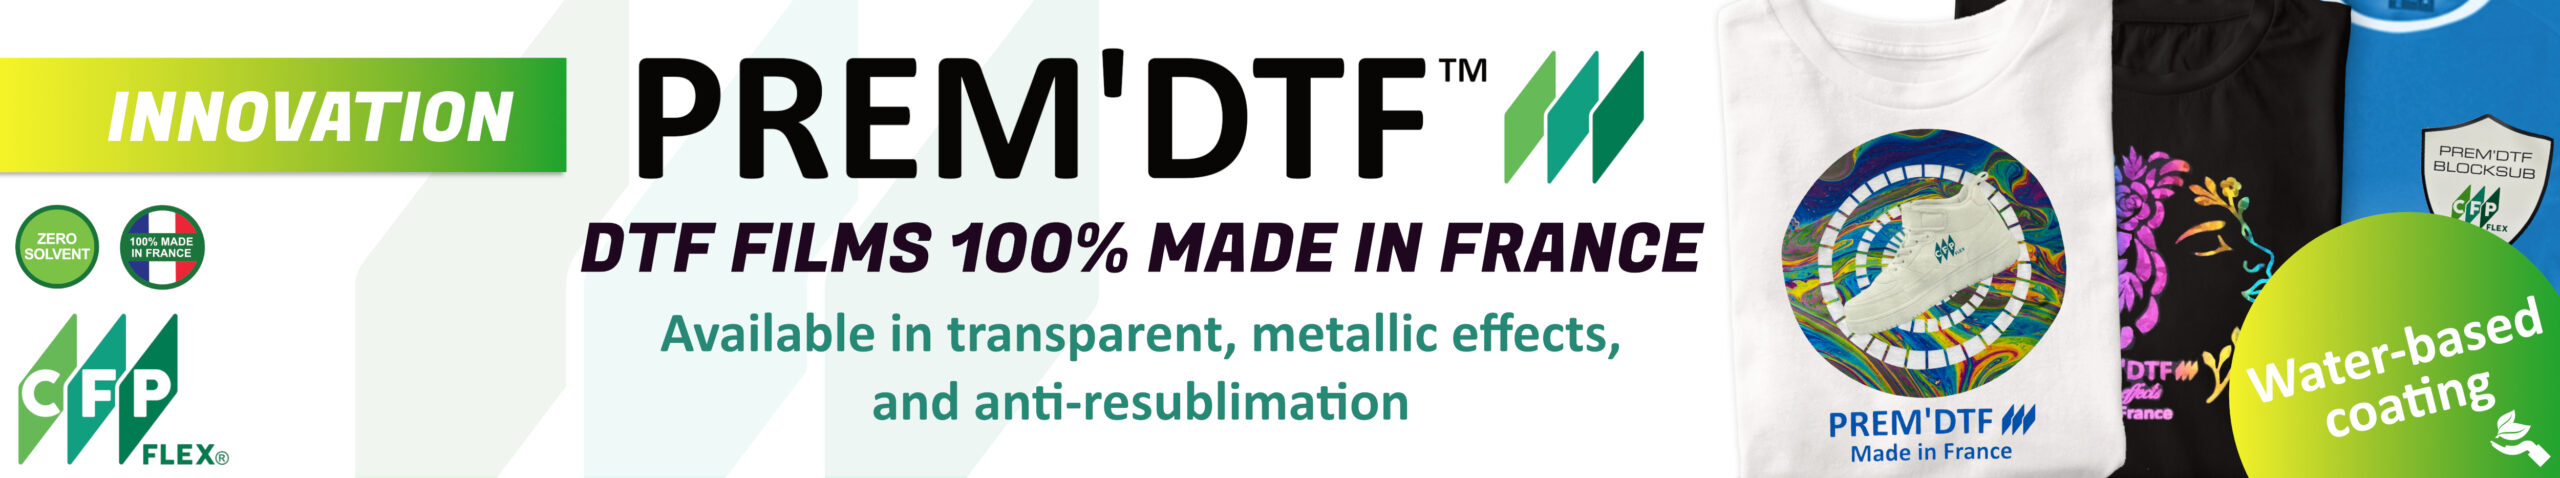 Discover the innovation DTF Transfer Films Direct To Film - Direct printing with DTF inks and DTF adhesive powder on the DTF film - no need of weeding